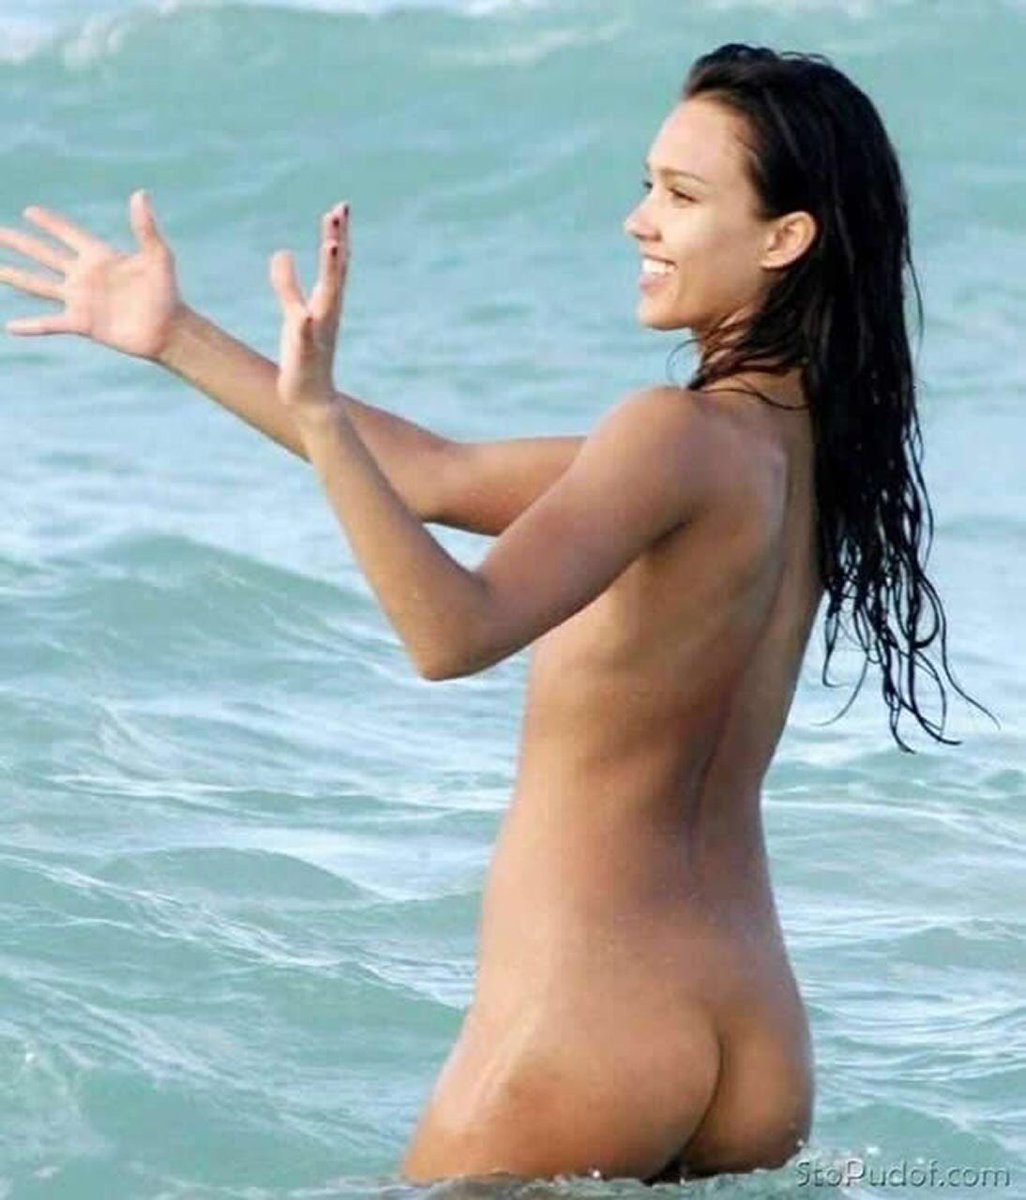 Who wouldn’t want to fuck Jessica Alba? 